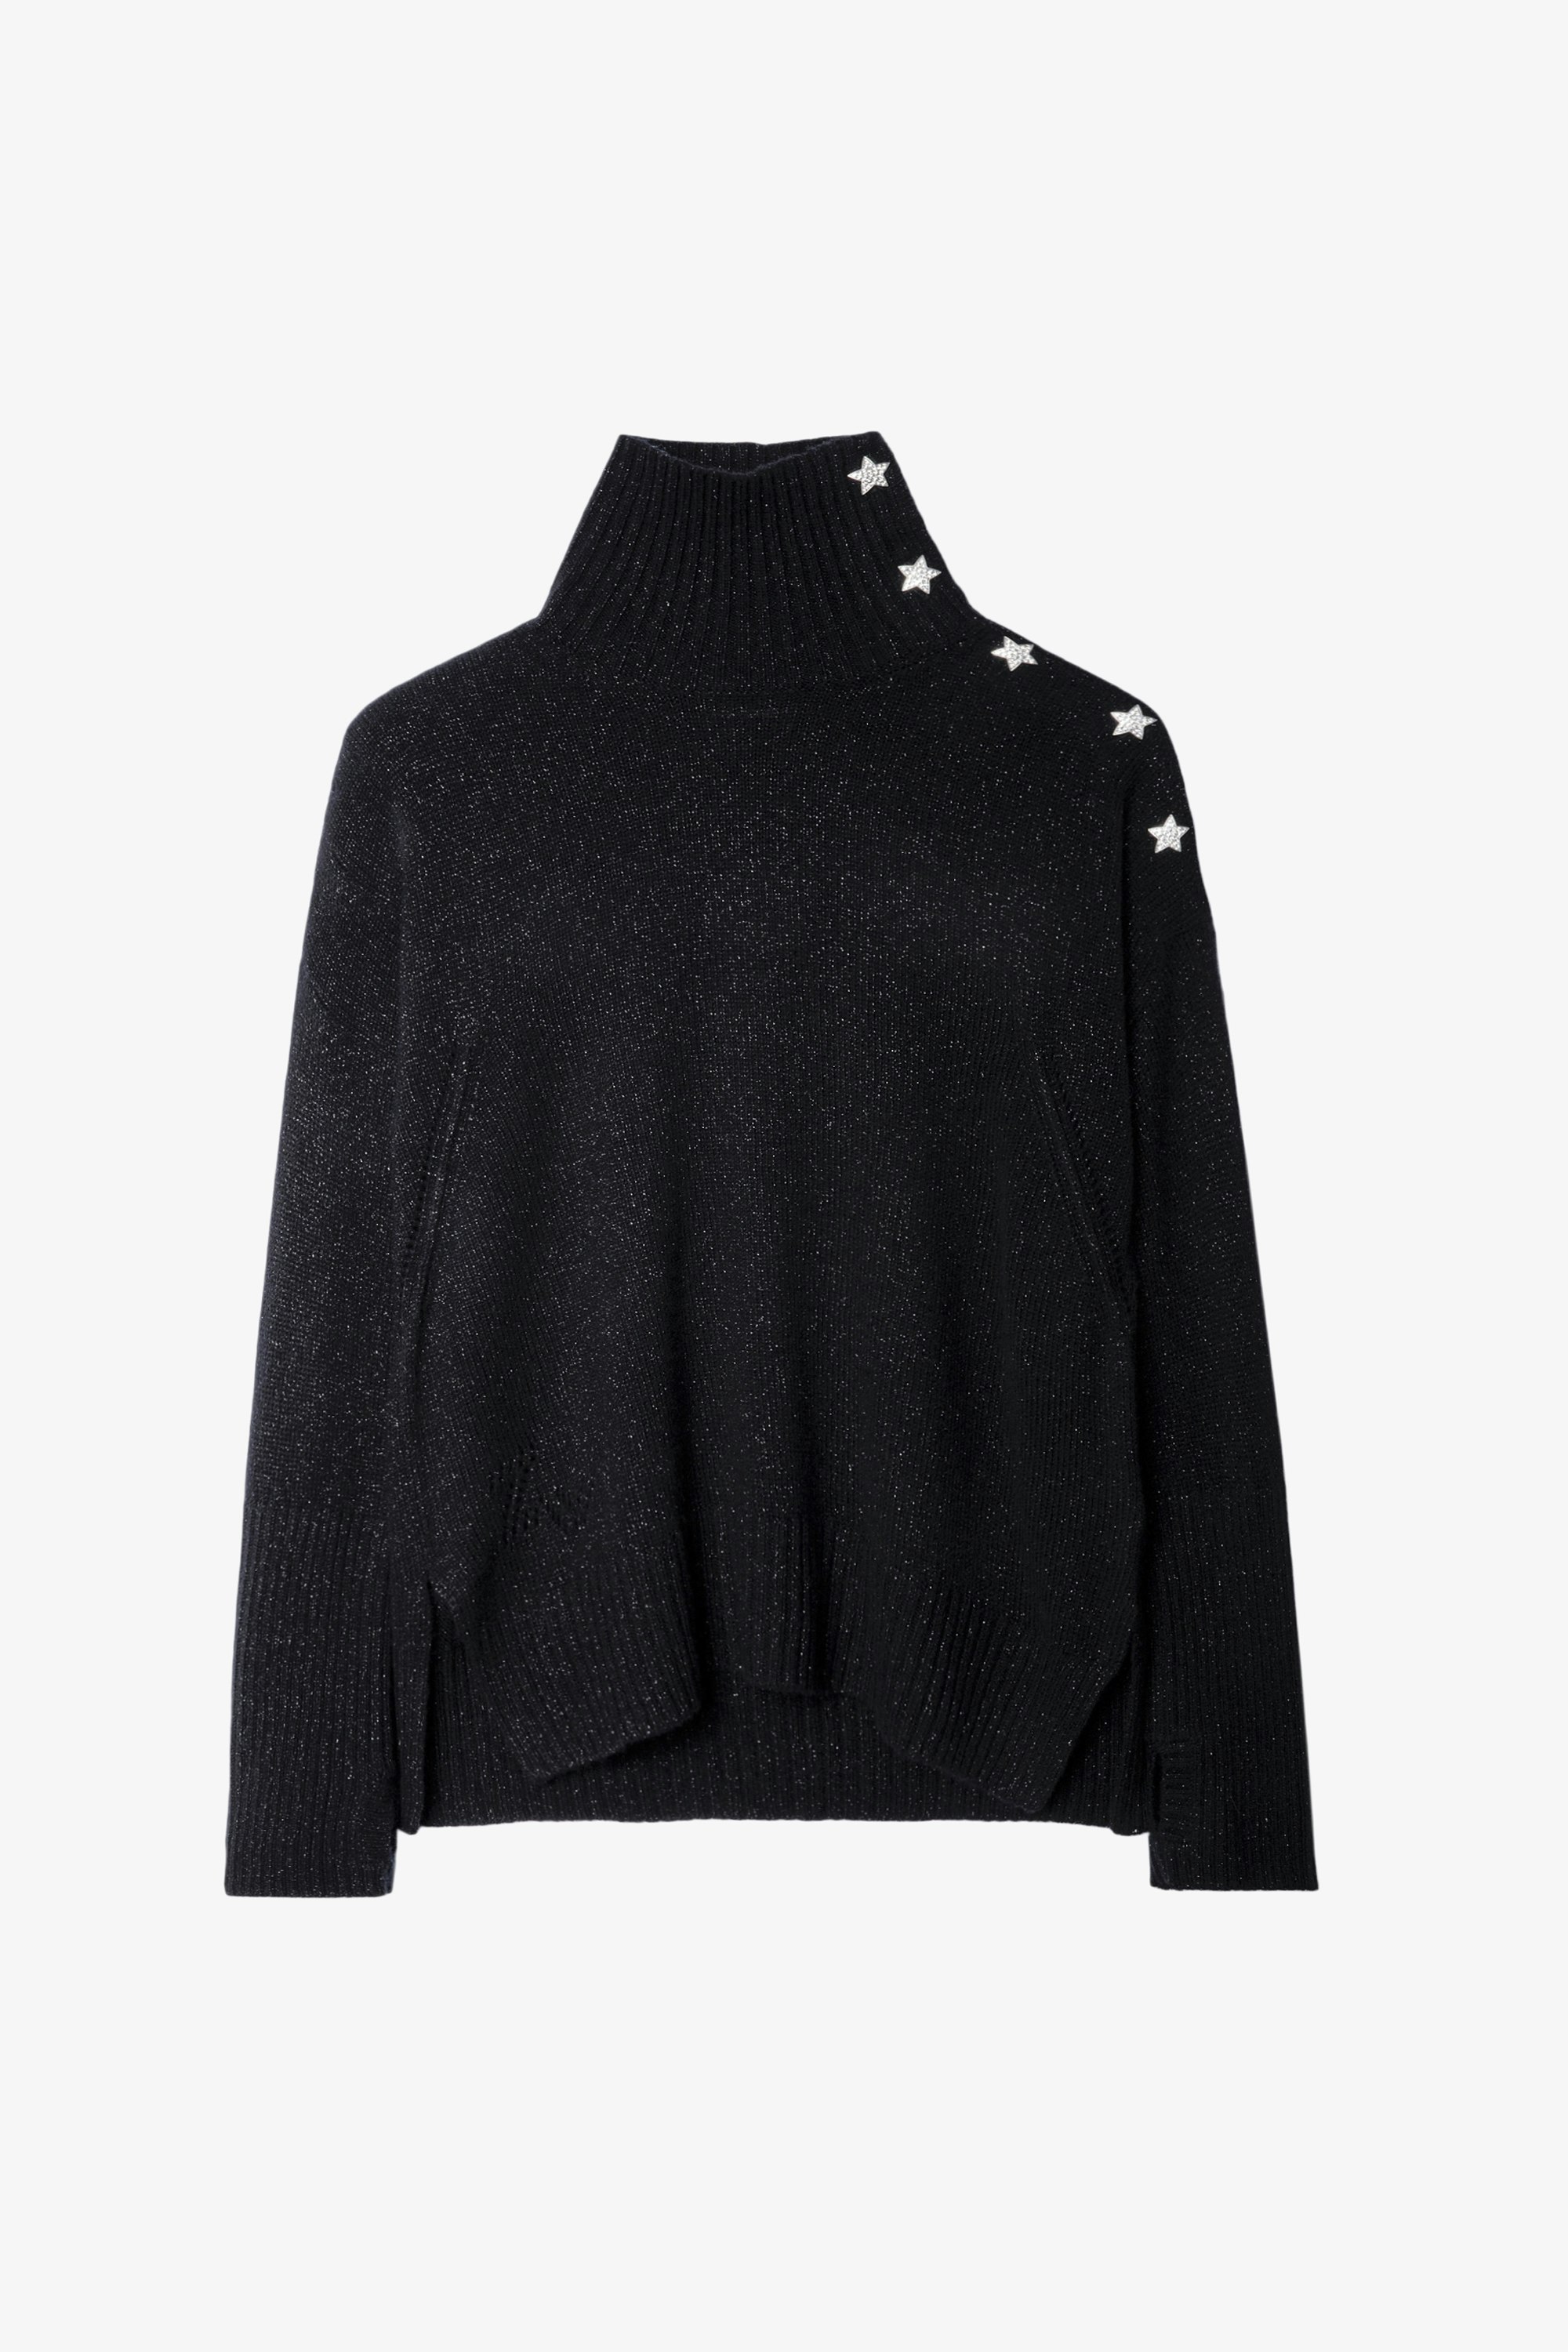 Alma Jeweled Sweater - Women's cashmere turtleneck sweater with star buttons in black.